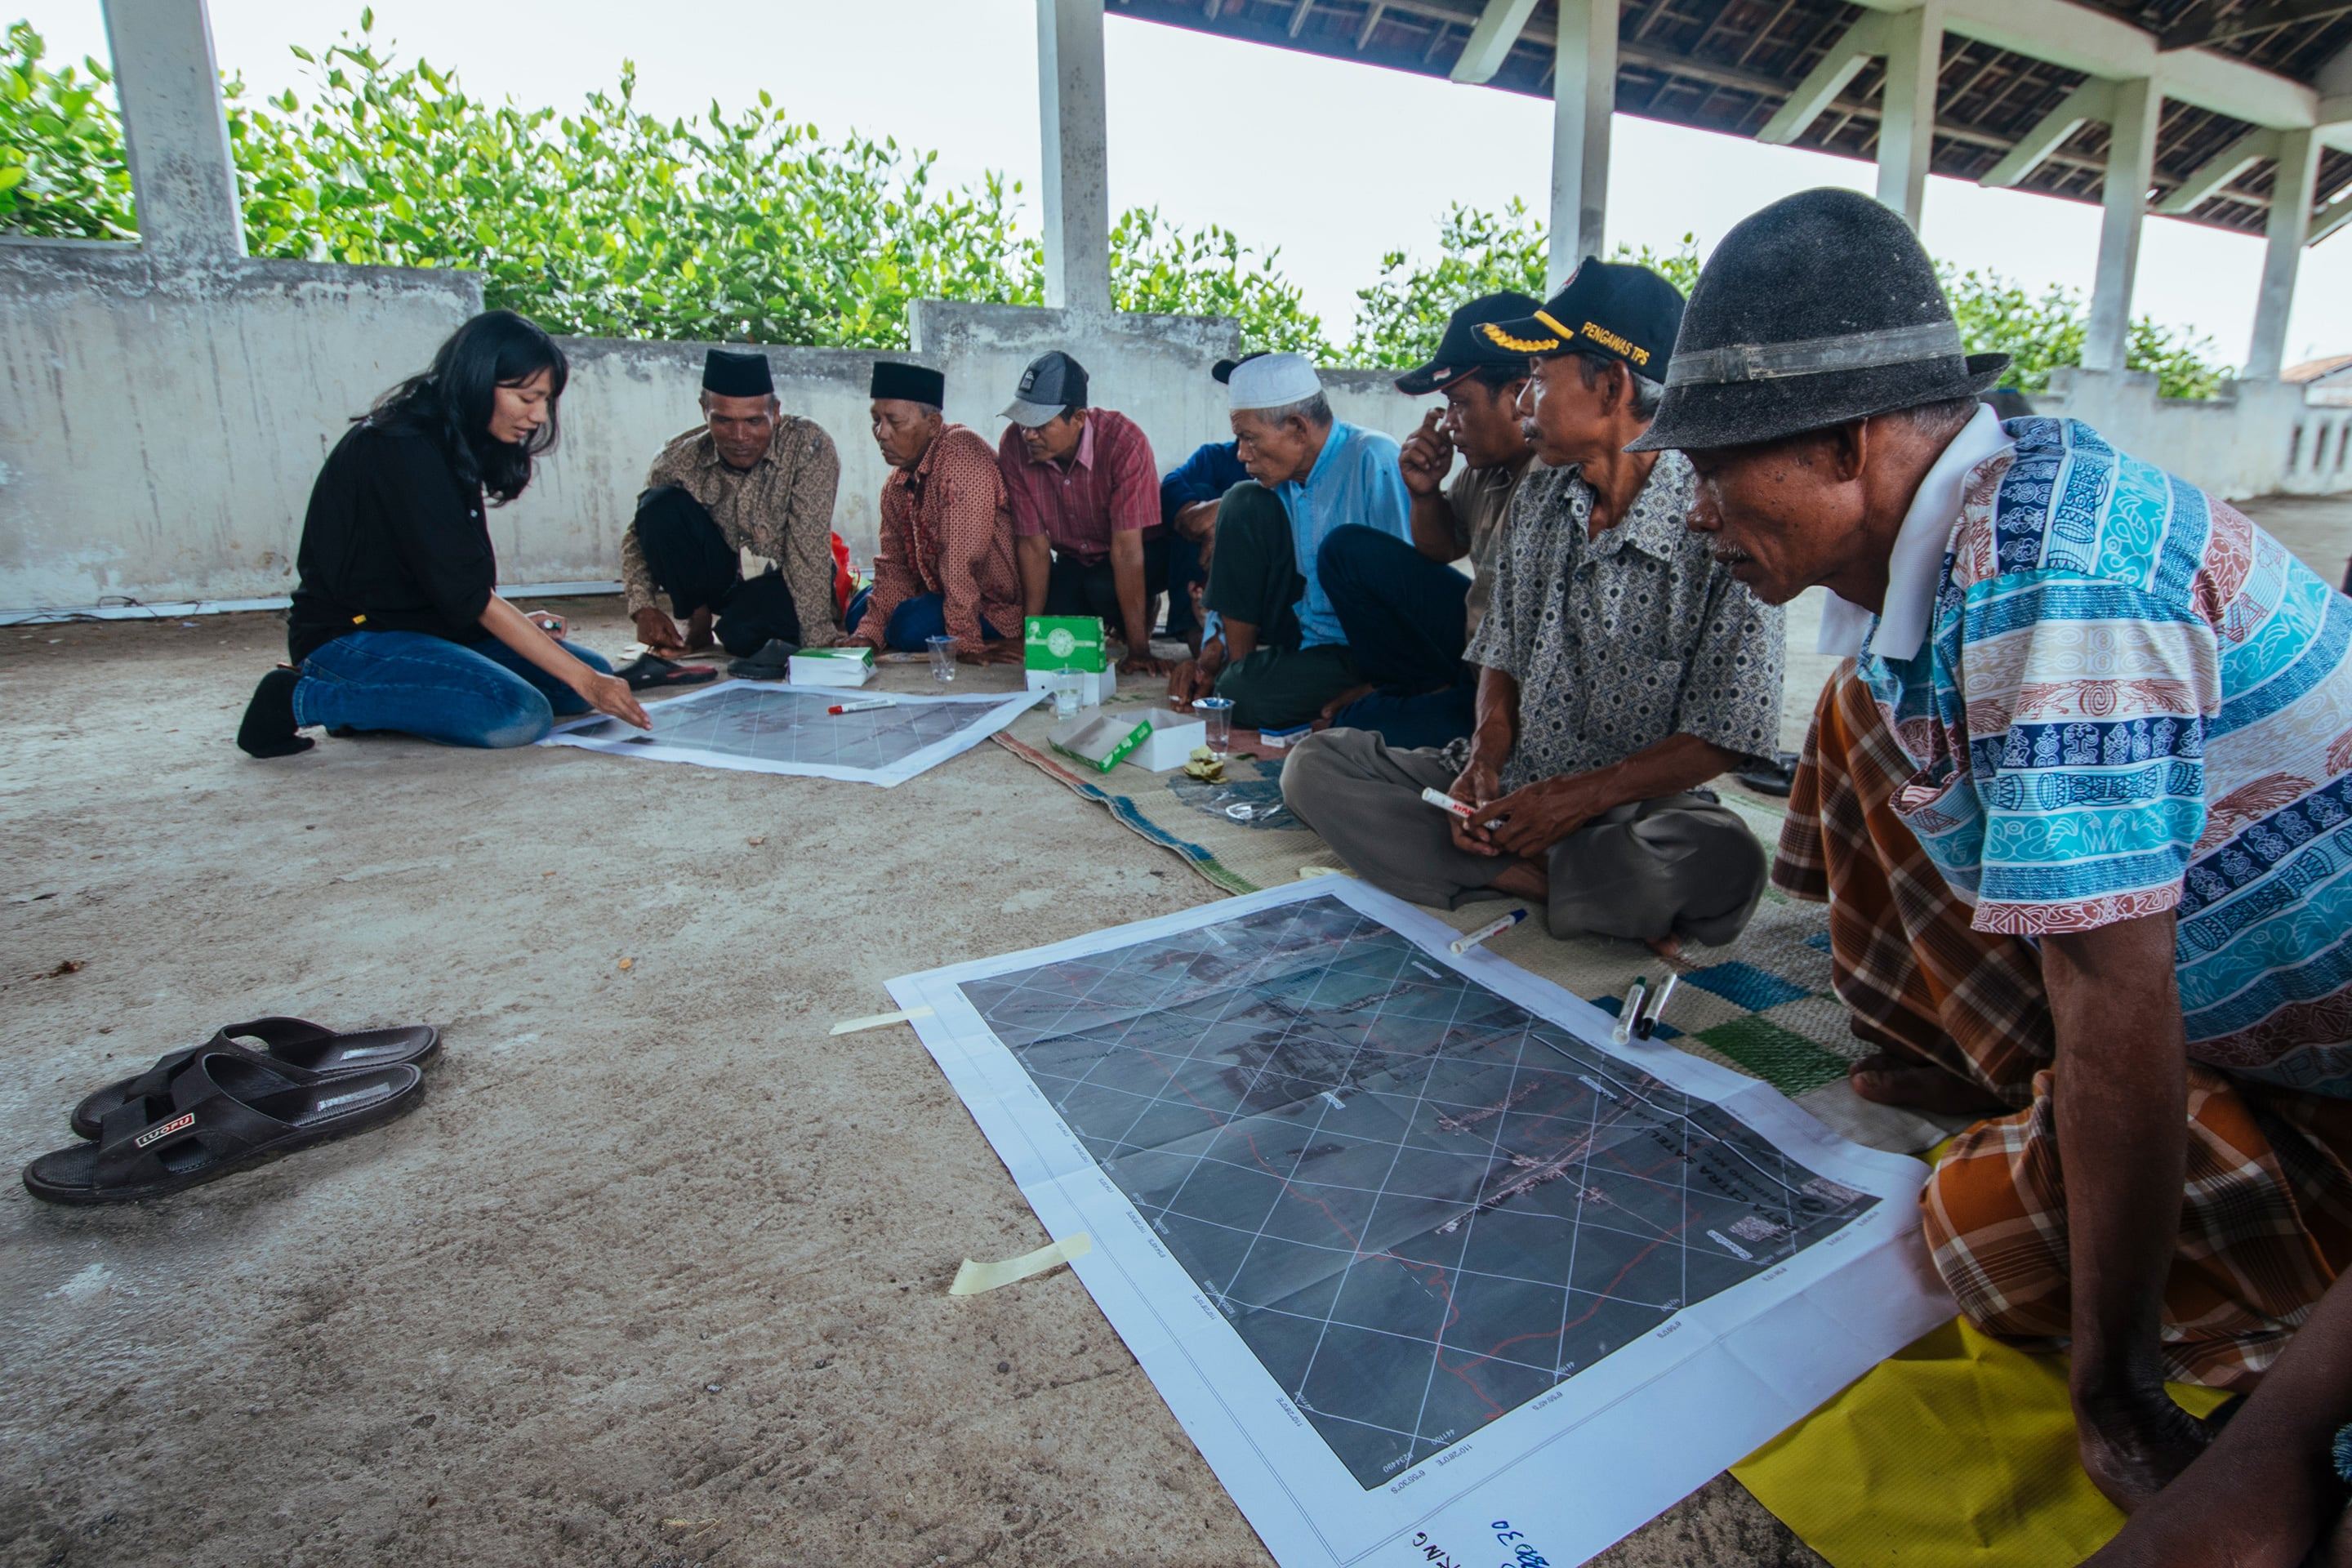 Coastal Field School to train the villagers in critical thinking skills to develop aquaculture practices